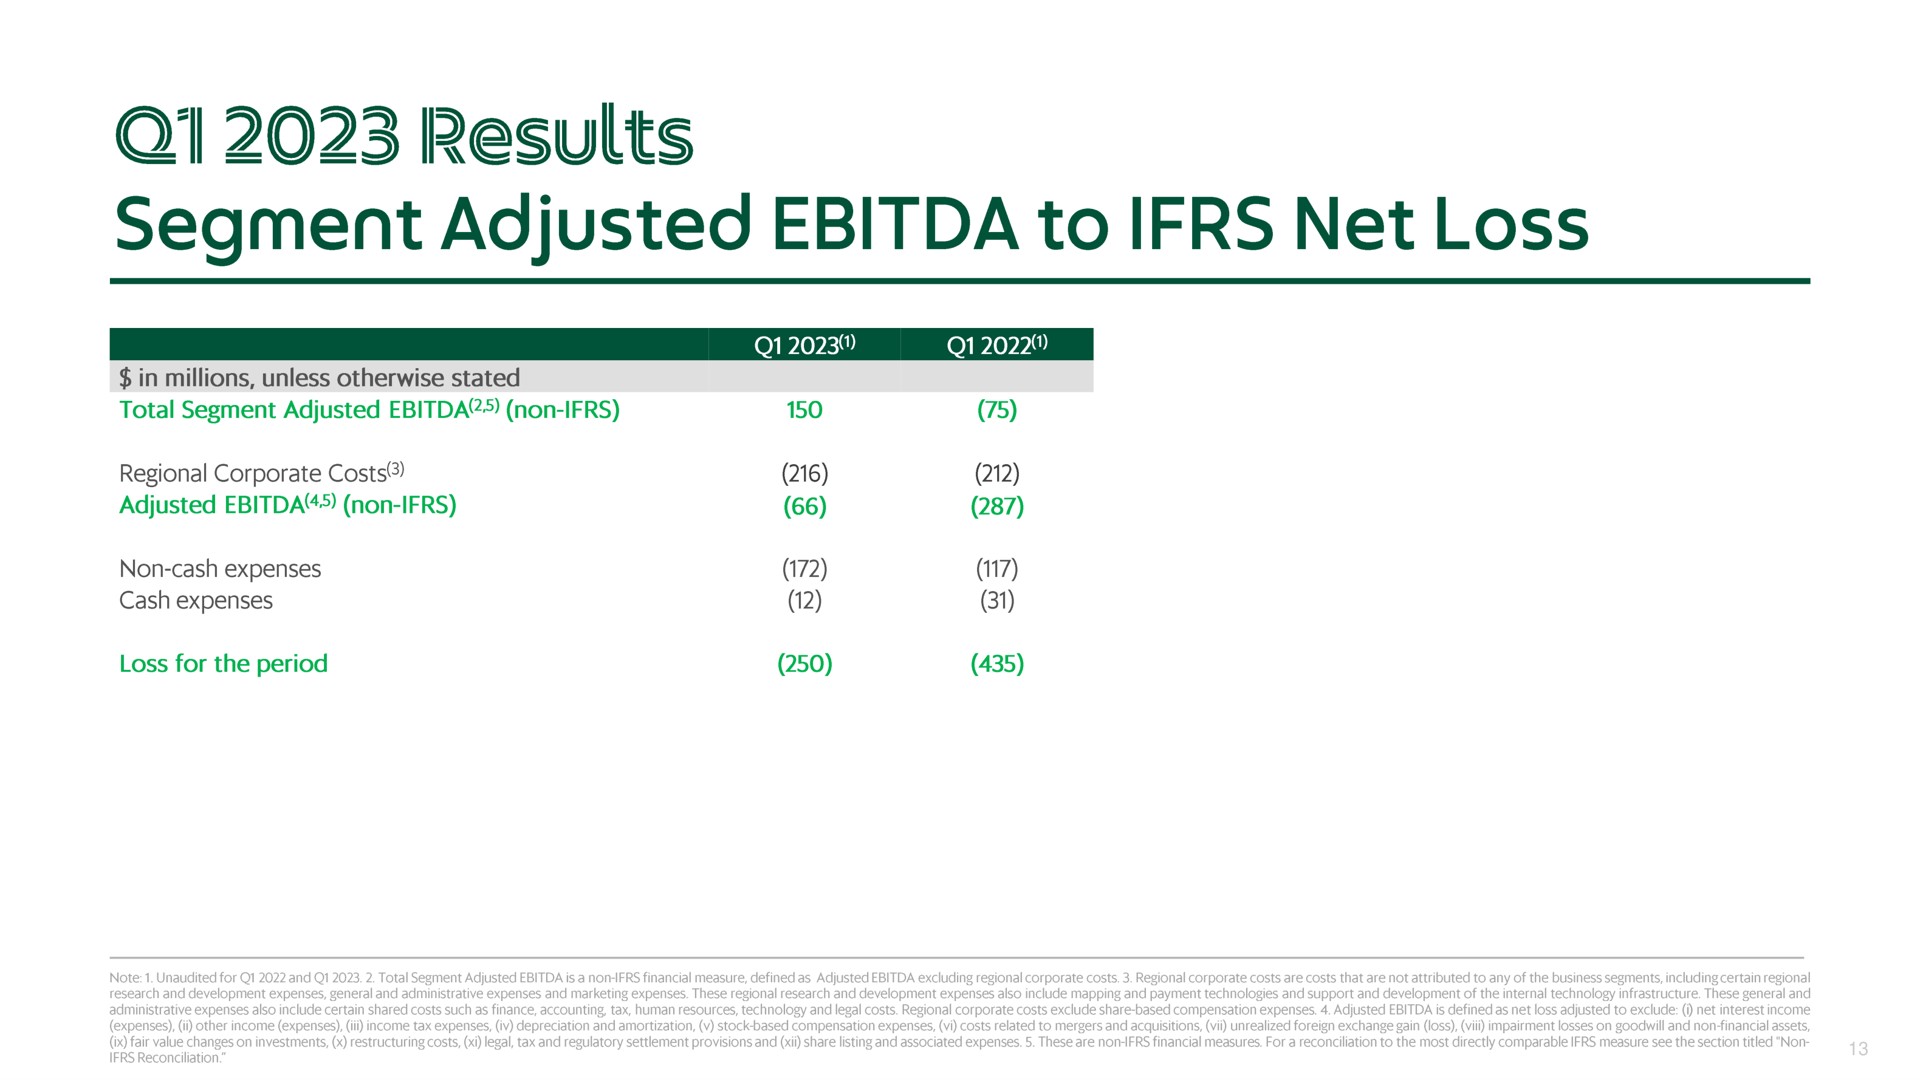 results segment adjusted to net loss | Grab